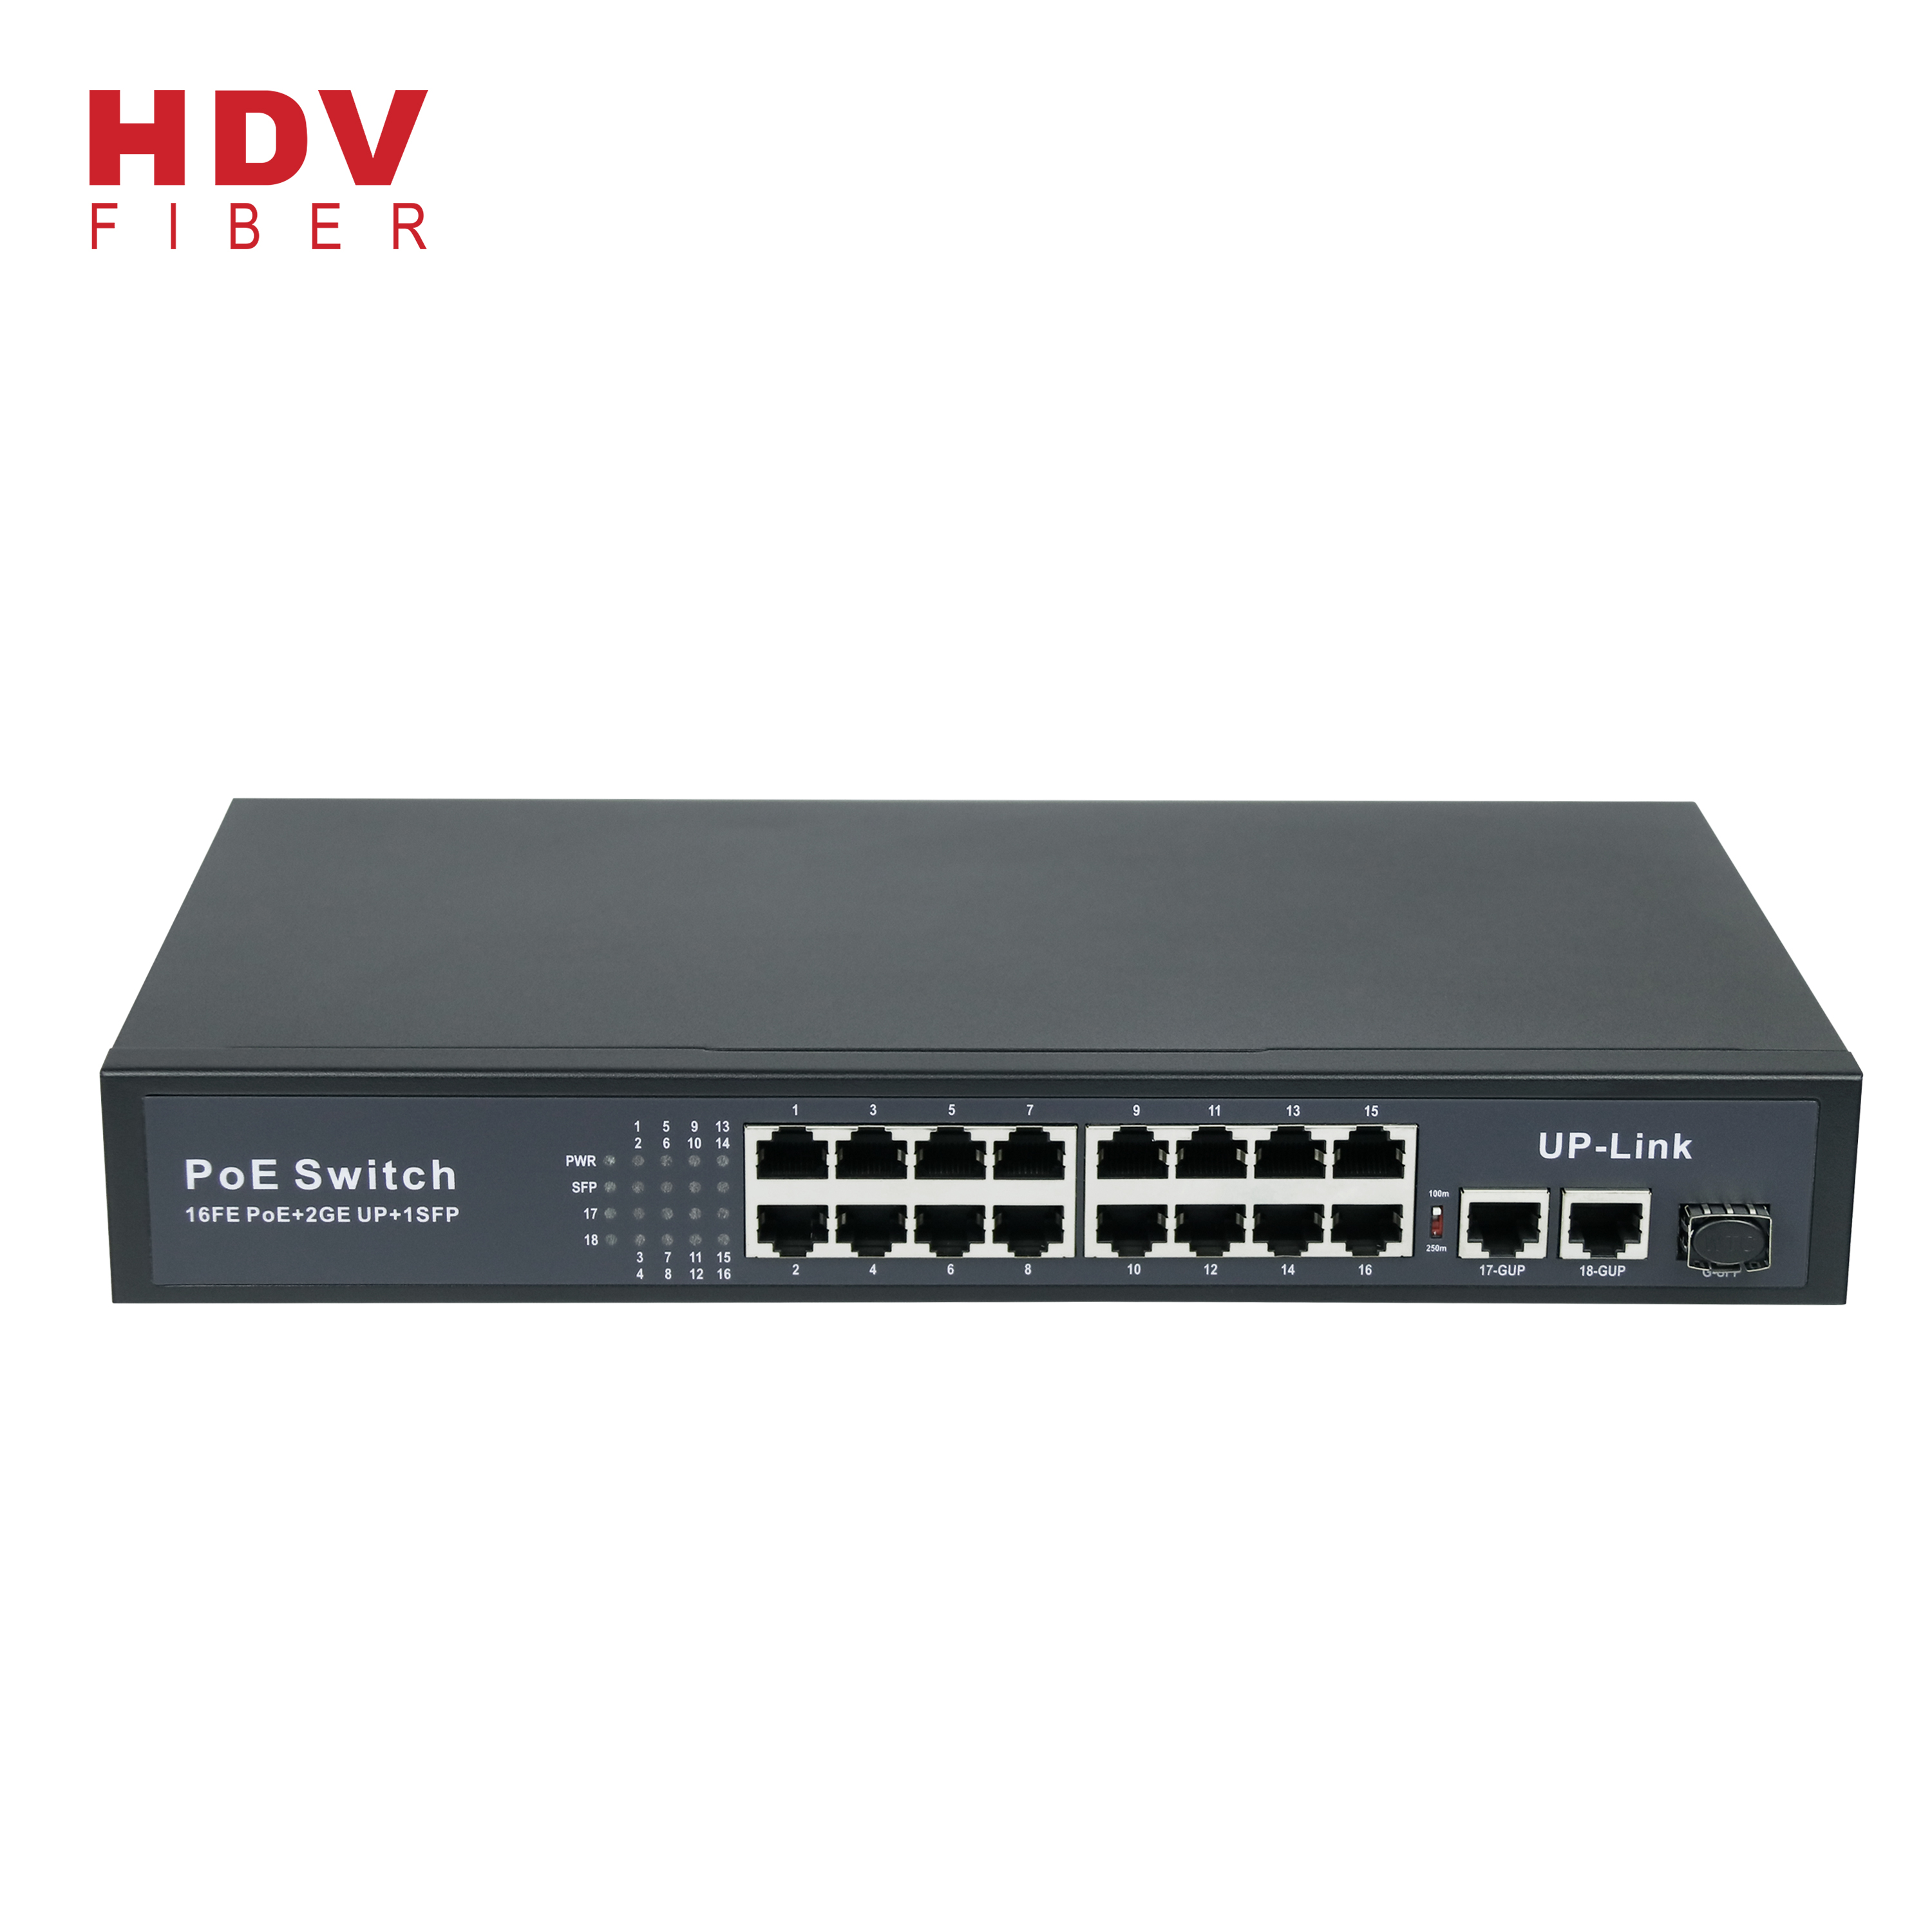 Max Power Supply UP To 300W 16FE POE+2GE UP+1G SFP 16 Port POE Switch Featured Image